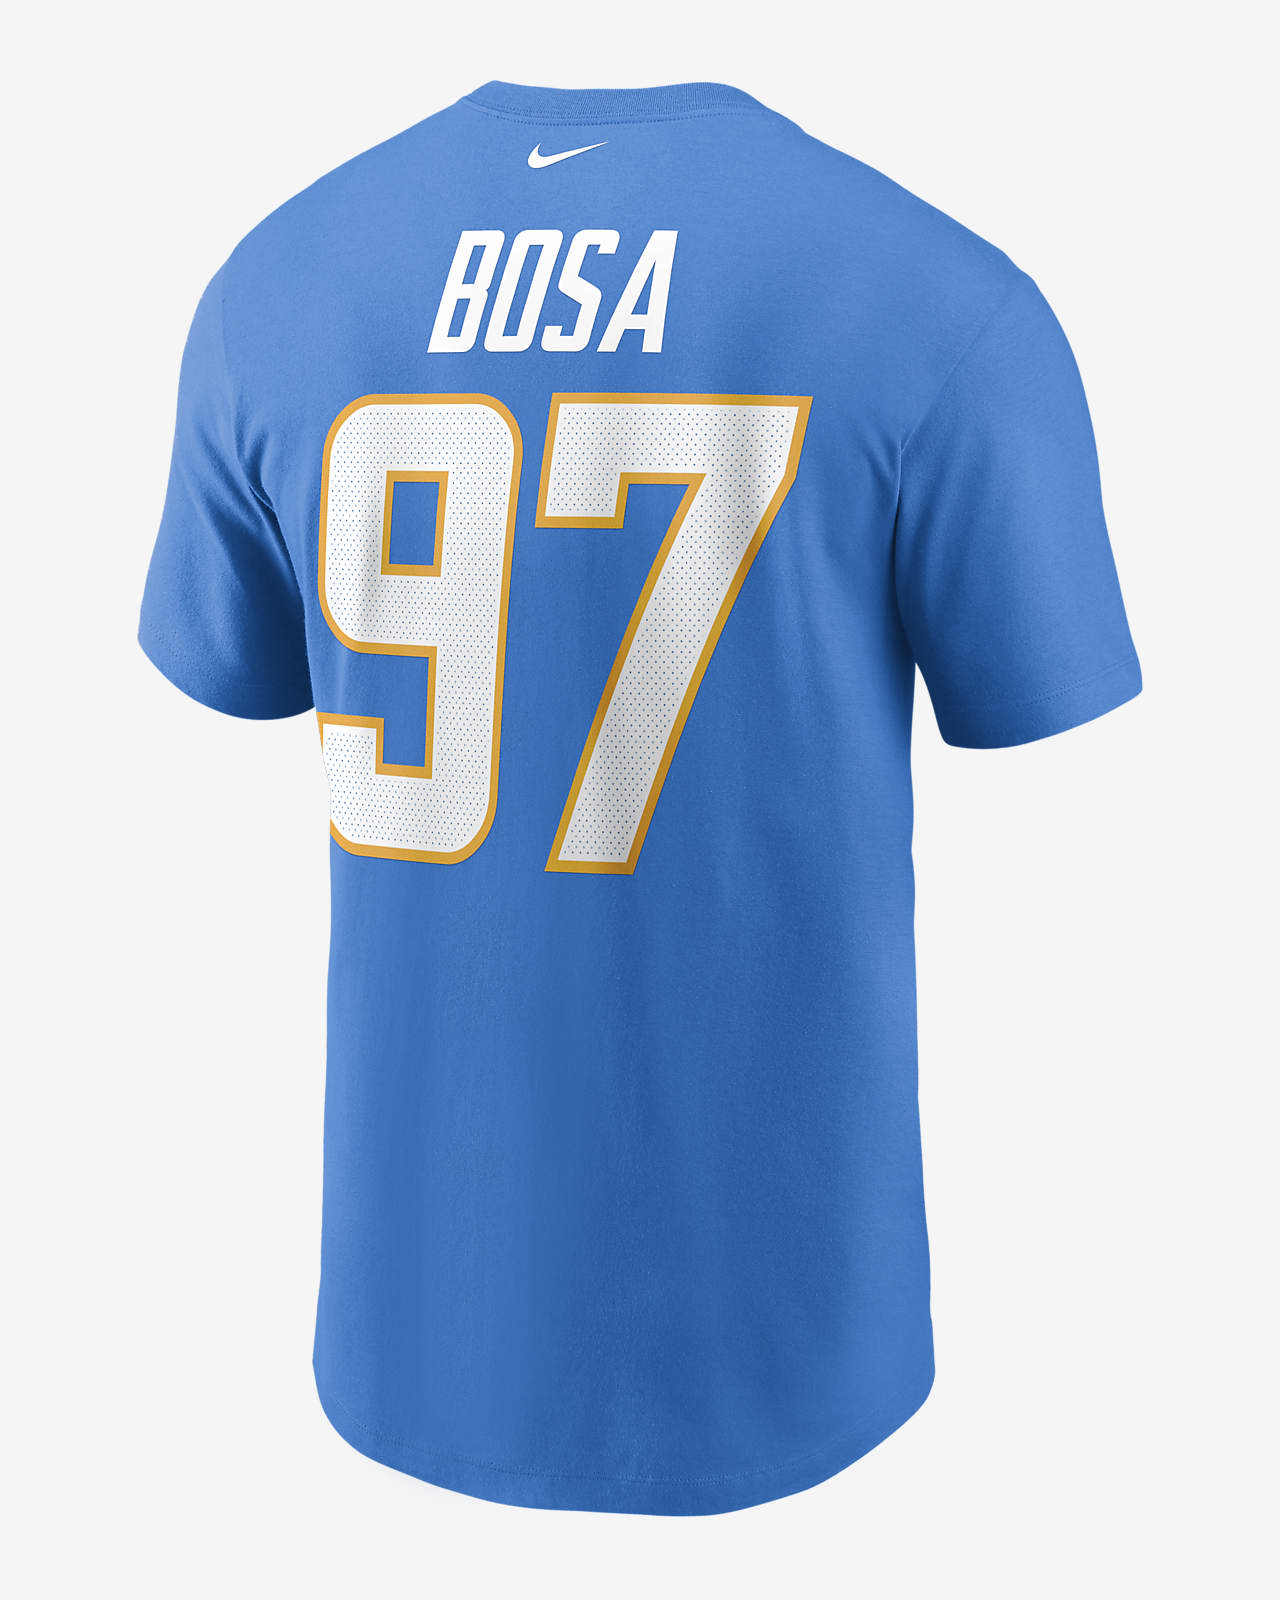 NFL Los Angeles Chargers (Joey Bosa) Men's T-Shirt.